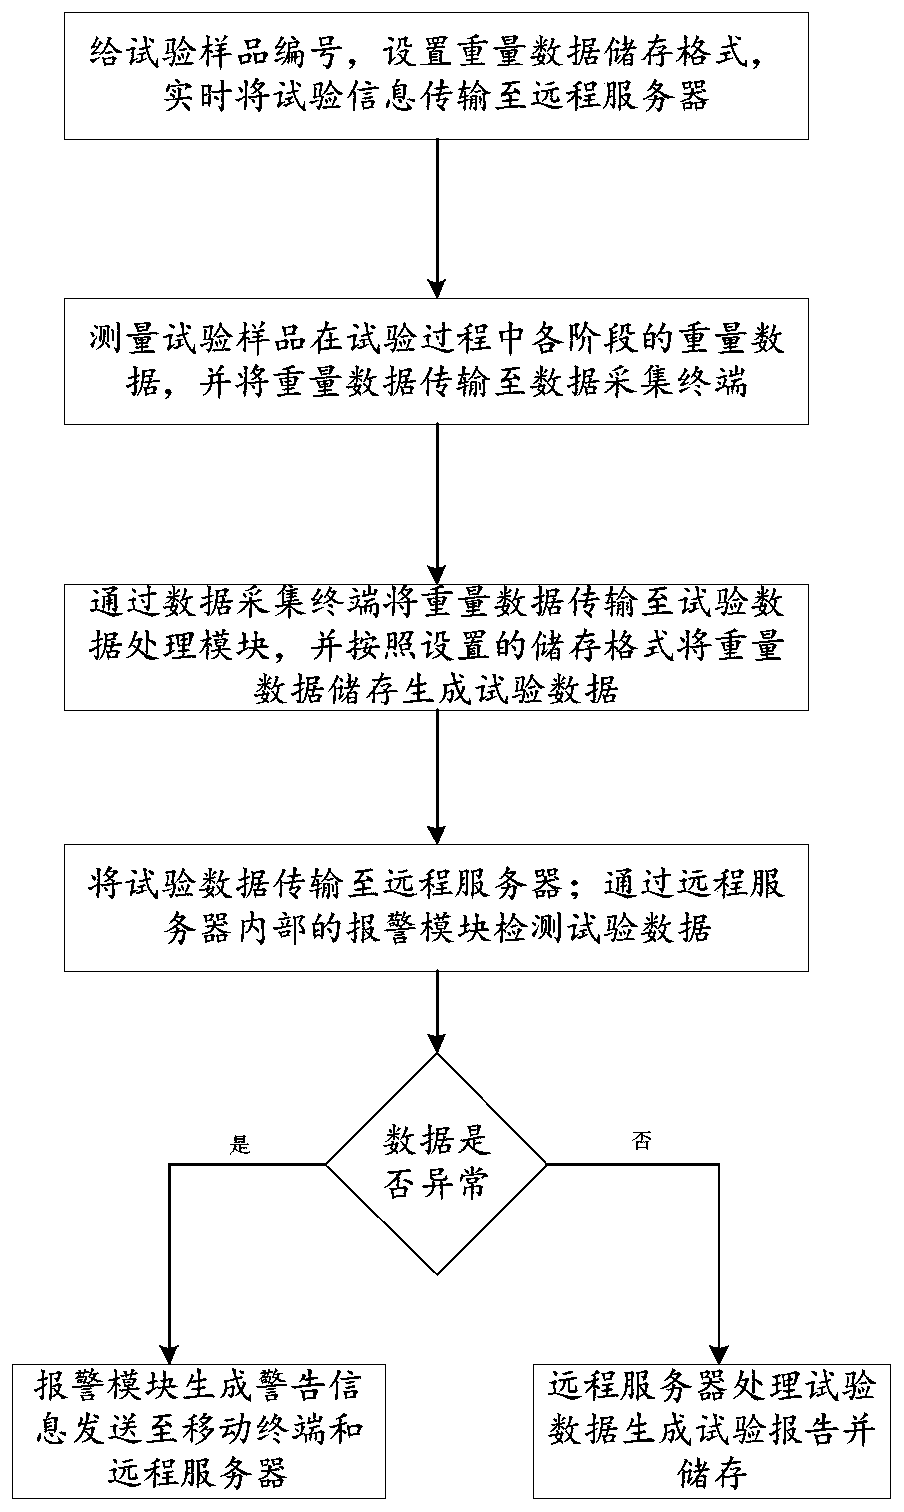 Real-time monitoring system and method for aggregate test